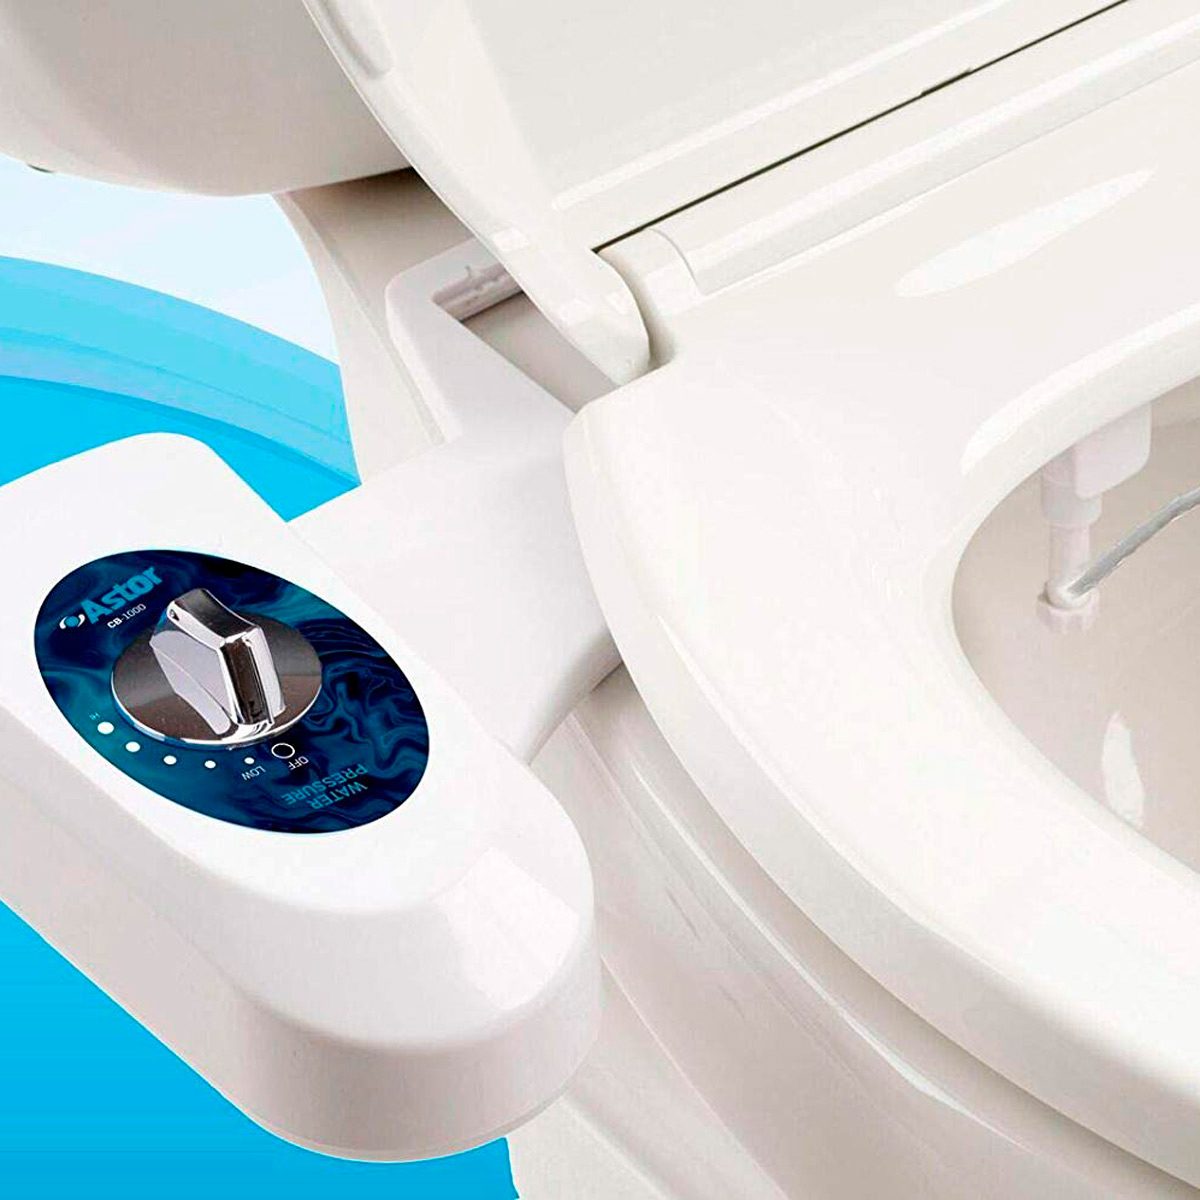 <p>This <a href="https://www.amazon.com/dp/B082GBTTP6/?tag=fhm_msn-20" rel="nofollow noopener noreferrer">bidet attachment</a> takes just 10 minutes to install to your existing toilet. Everything you need is included in the box. It's less inexpensive than some other models, so it's an affordable option to add to all your home's bathrooms.</p> <p>"Get this bidet," says one buyer. "The hookup process is really easy. As in, my wife and I had it from in the box to testing out the bidet in about fifteen minutes. Most of those minutes were spent trying to find a screwdriver. Using it is really easy. You turn a dial. The more you turn it, the <a href="https://www.familyhandyman.com/project/boost-low-water-pressure-in-your-house/">harder the water pressure.</a>"</p> <p class="listicle-page__cta-button-shop"><a class="shop-btn" href="https://www.amazon.com/dp/B082GBTTP6/?tag=fhm_msn-20">Shop Now</a></p>